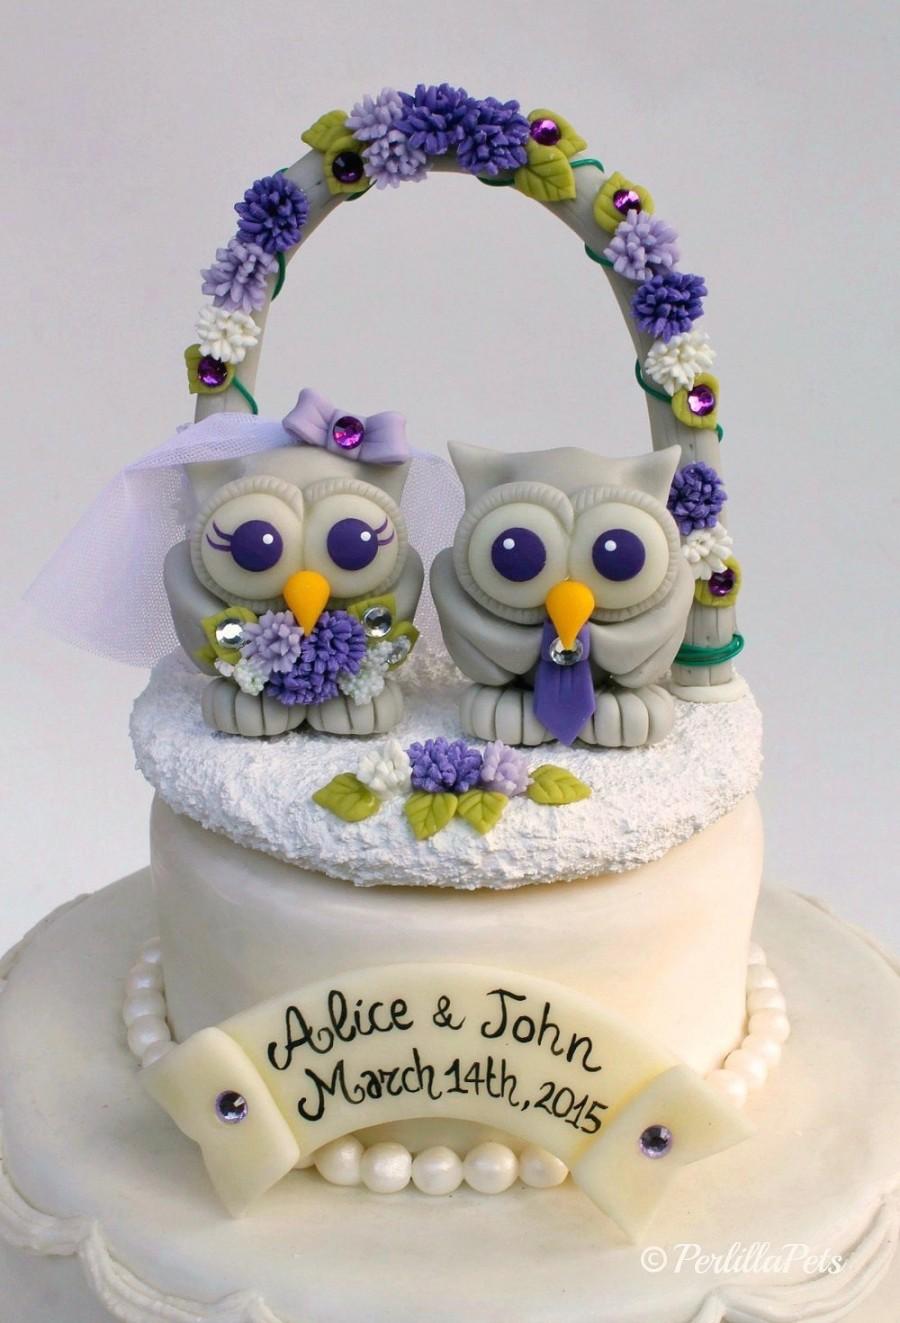 Wedding - Owl love birds wedding cake topper with floral arch and stand, purple lilac wedding, custom cake topper with banner